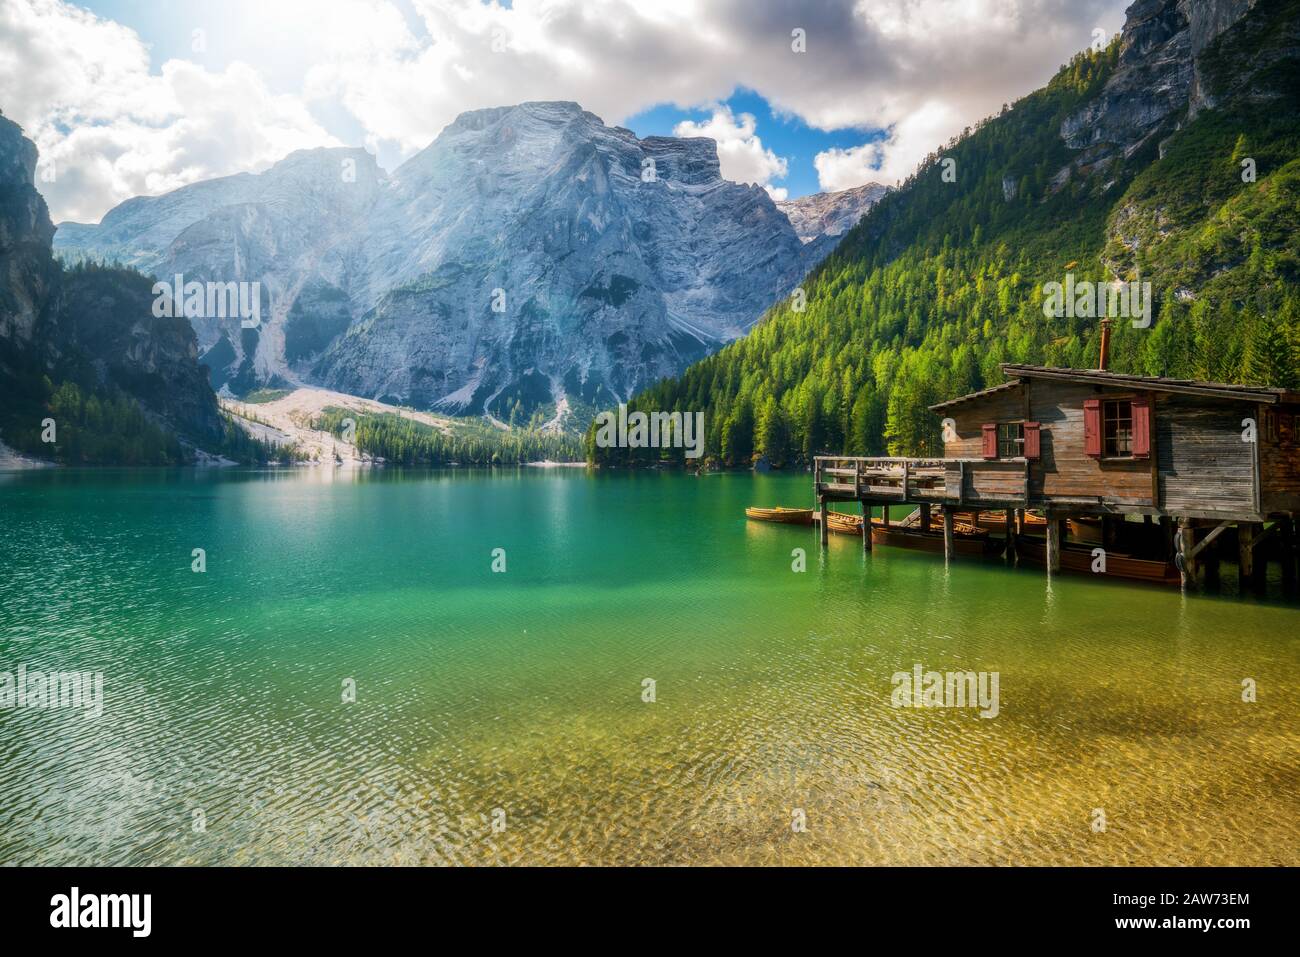 Braies Lake in Dolomites mountains Seekofel in background, Sudtirol, Italy. Lake Braies is also known as Lago di Braies. The lake is surrounded by the Stock Photo